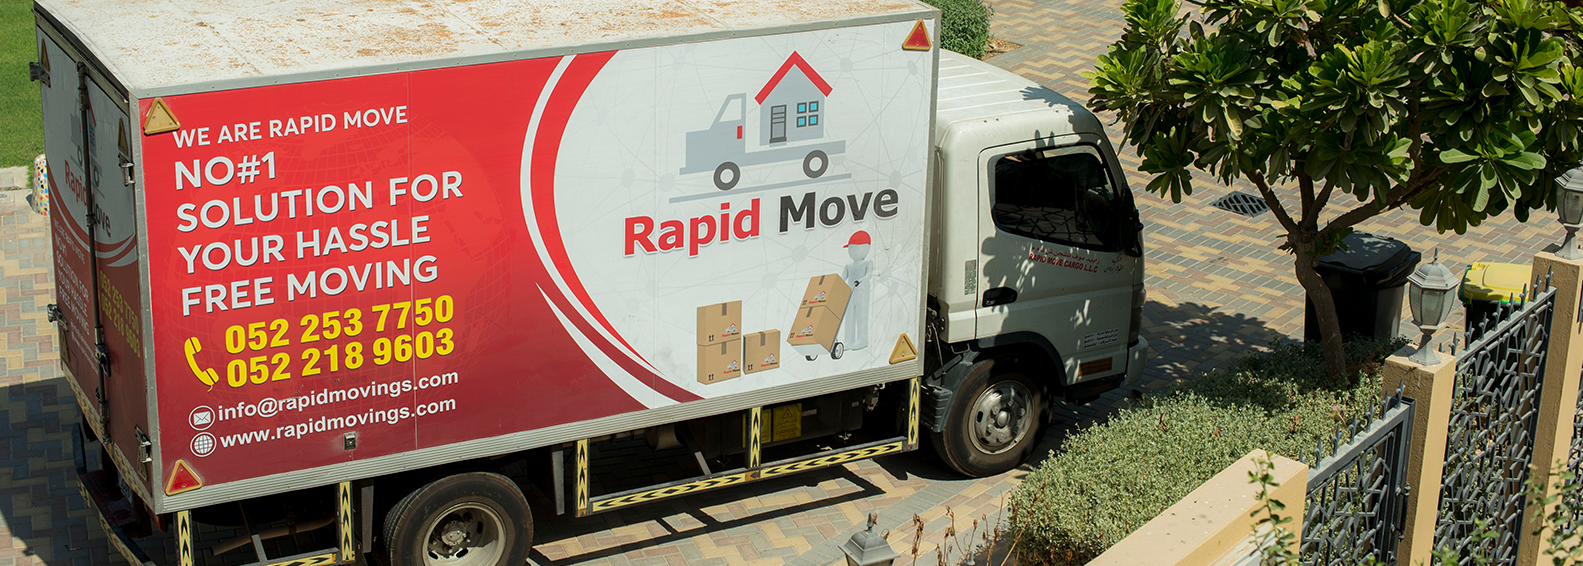 A moving truck of Rapid Rapid Move, parking in the porch in Dubai.